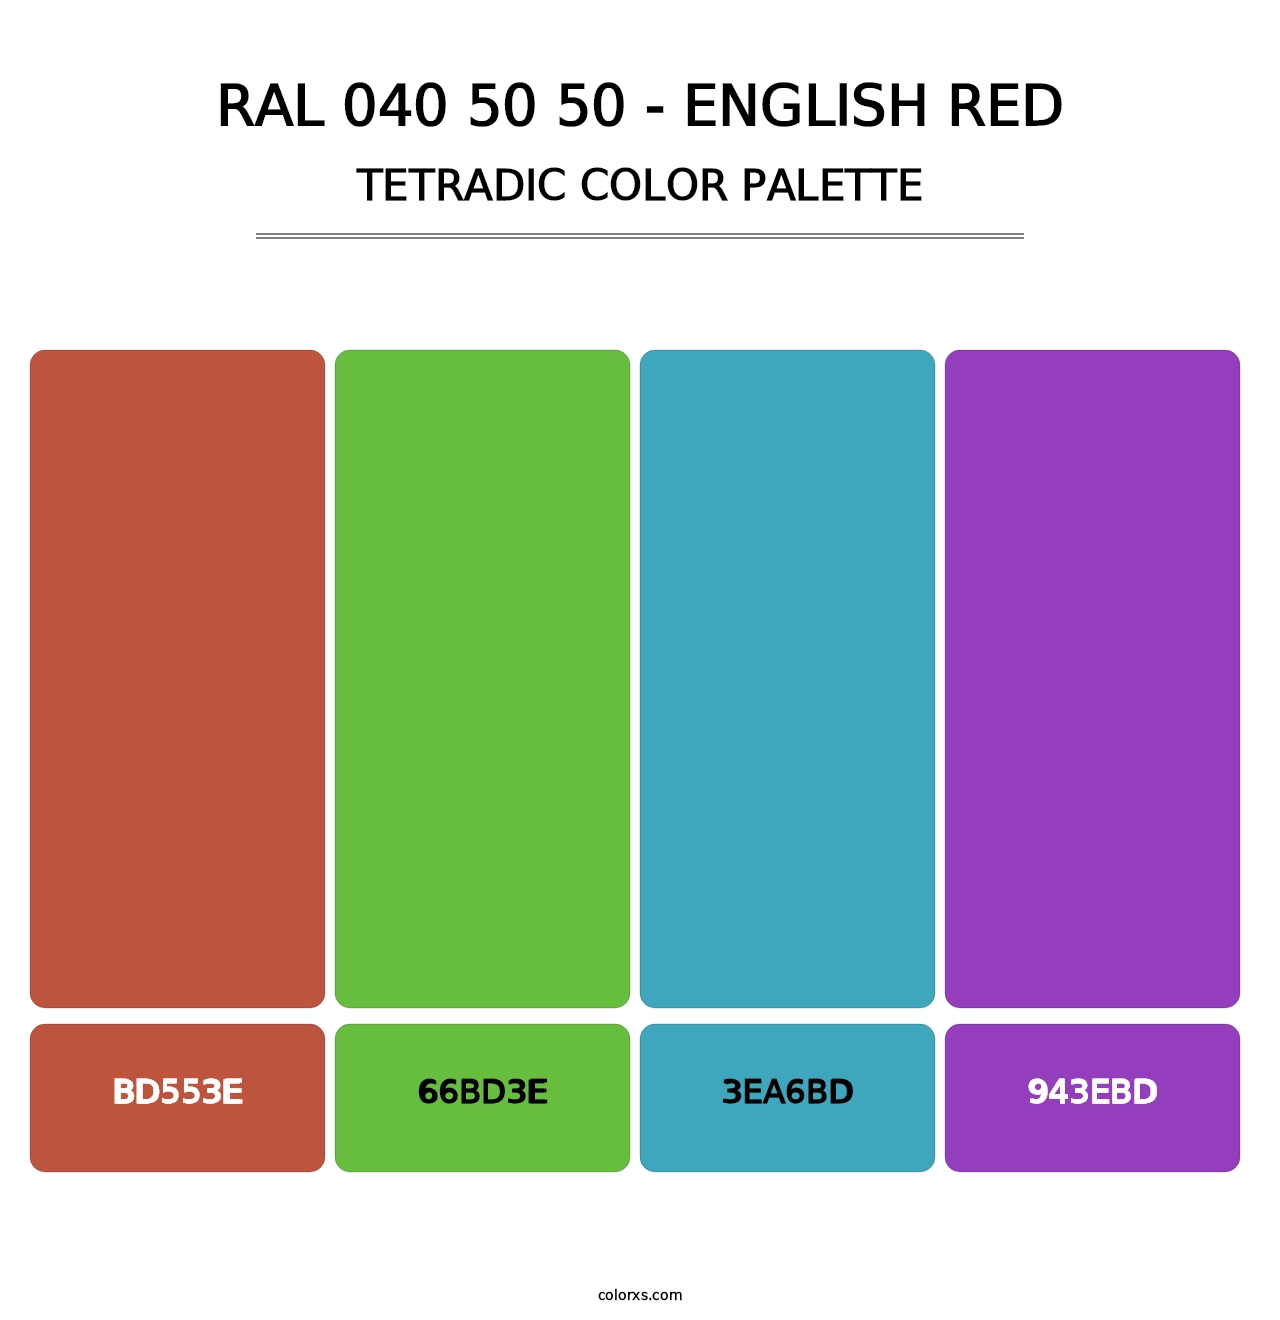 RAL 040 50 50 - English Red - Tetradic Color Palette